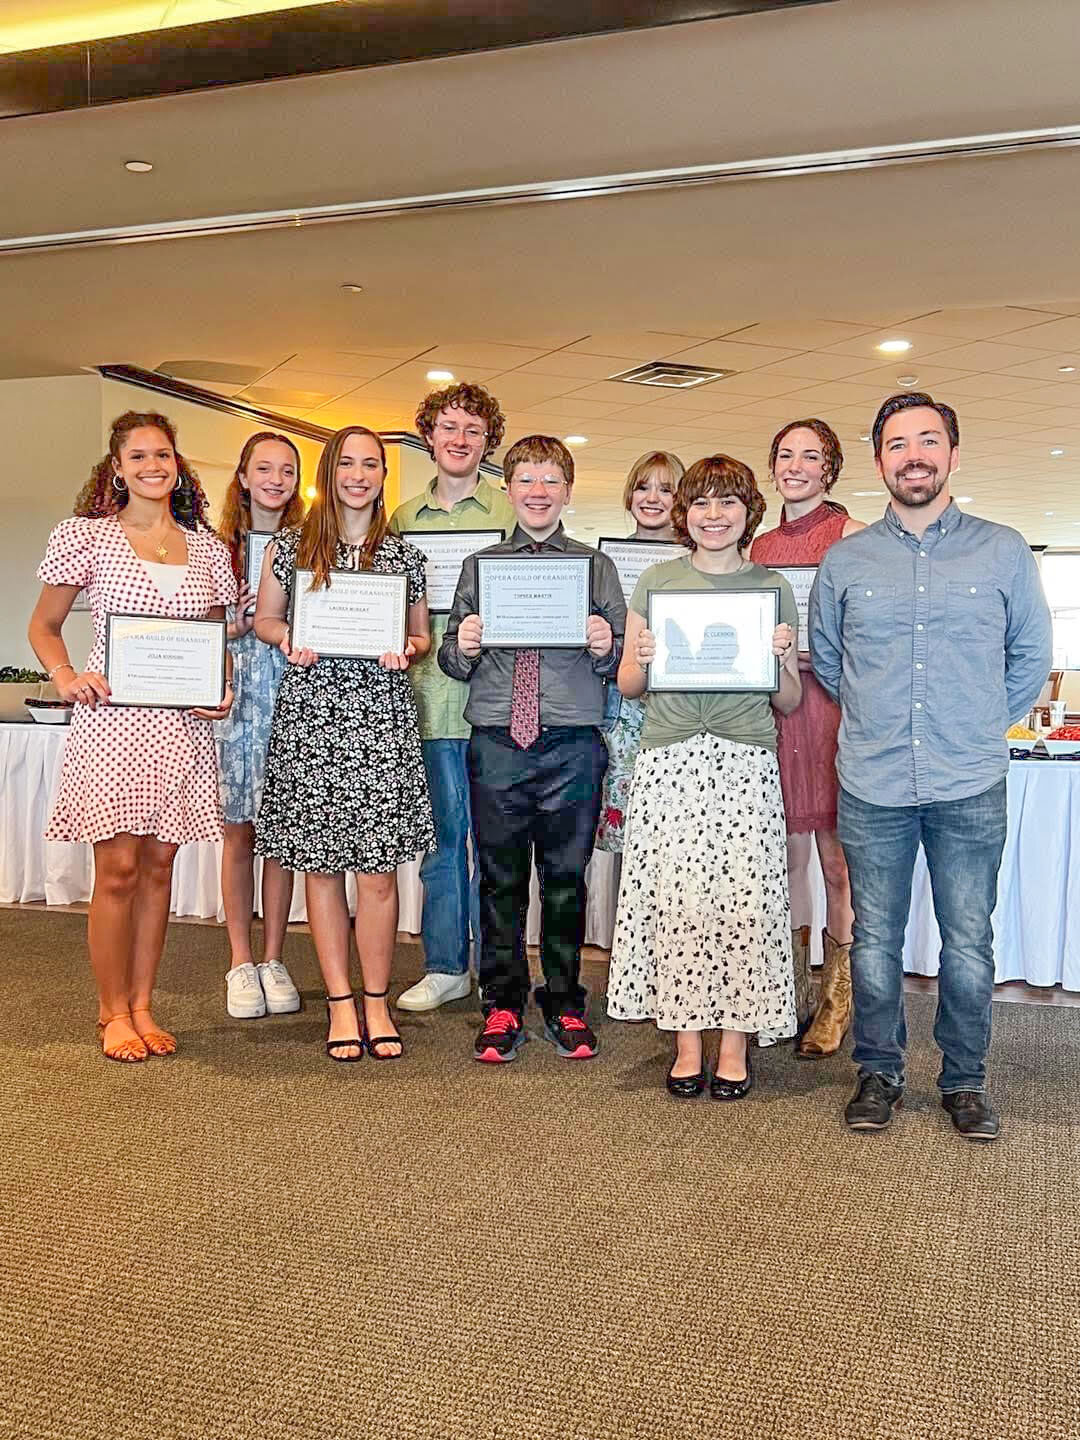 Eight Granbury Theatre Academy students received scholarships from the Opera Guild of Granbury during its last meeting totaling $5,450. Pictured are (from left) Julia Huggins, Meghan Murray, Lauren Murray, Micah Chesney, Topher Martin, Rachel Mastick, Lily (Finch) McClendon, Hannah Baker and Granbury Theatre Academy Director, Matt Beutner.